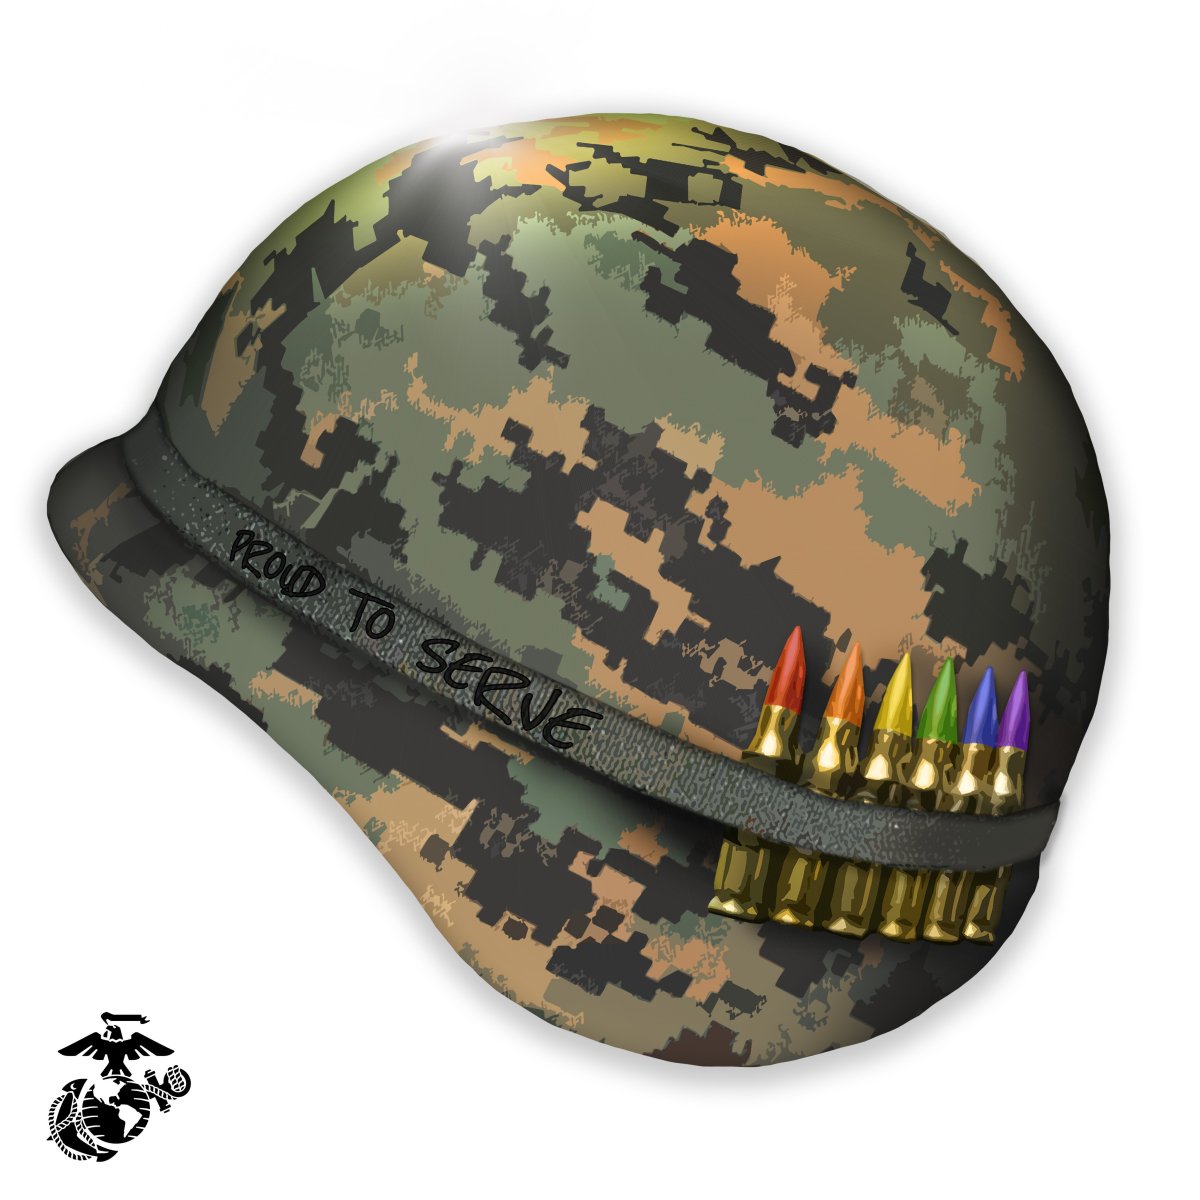 The U.S. marines tweeted this image of a combat helmet with rainbow bullets on June 1 to mark the beginning of Pride Month, sparking outrage from the left and right.